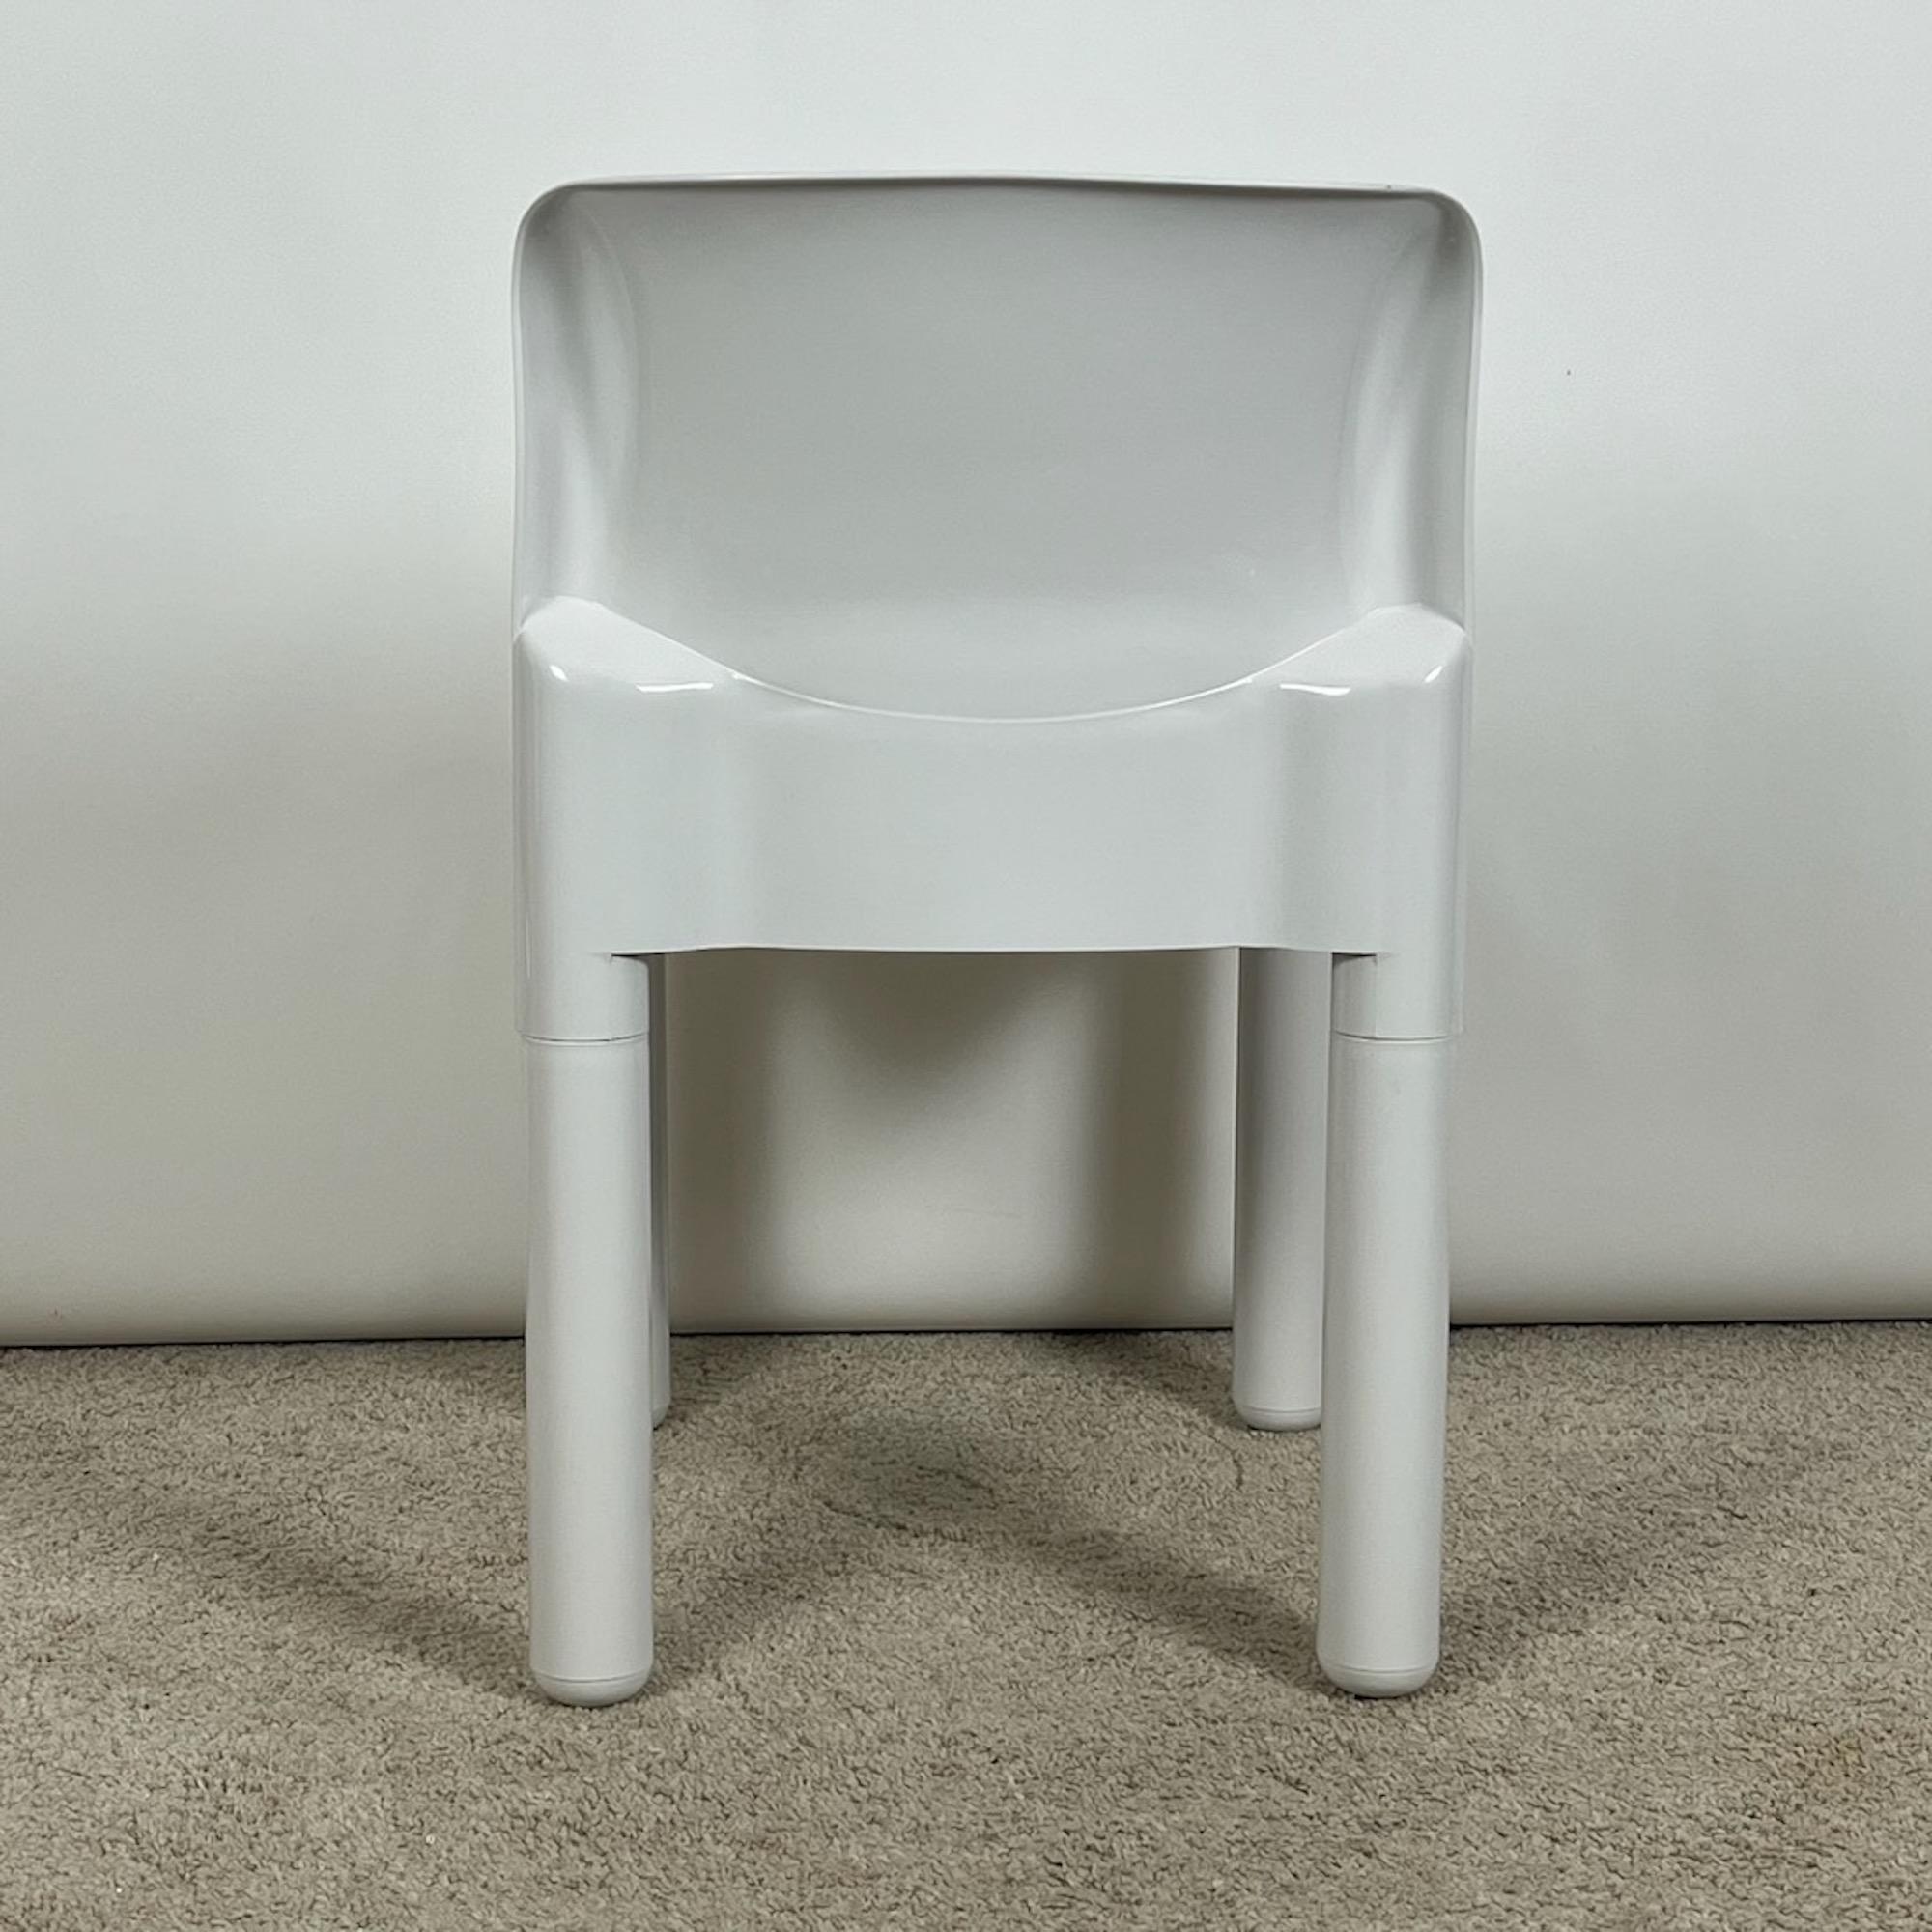 Italian Kartell Chair Model 4875 by Carlo Bartoli - Glossy White - Italy, 1970s For Sale